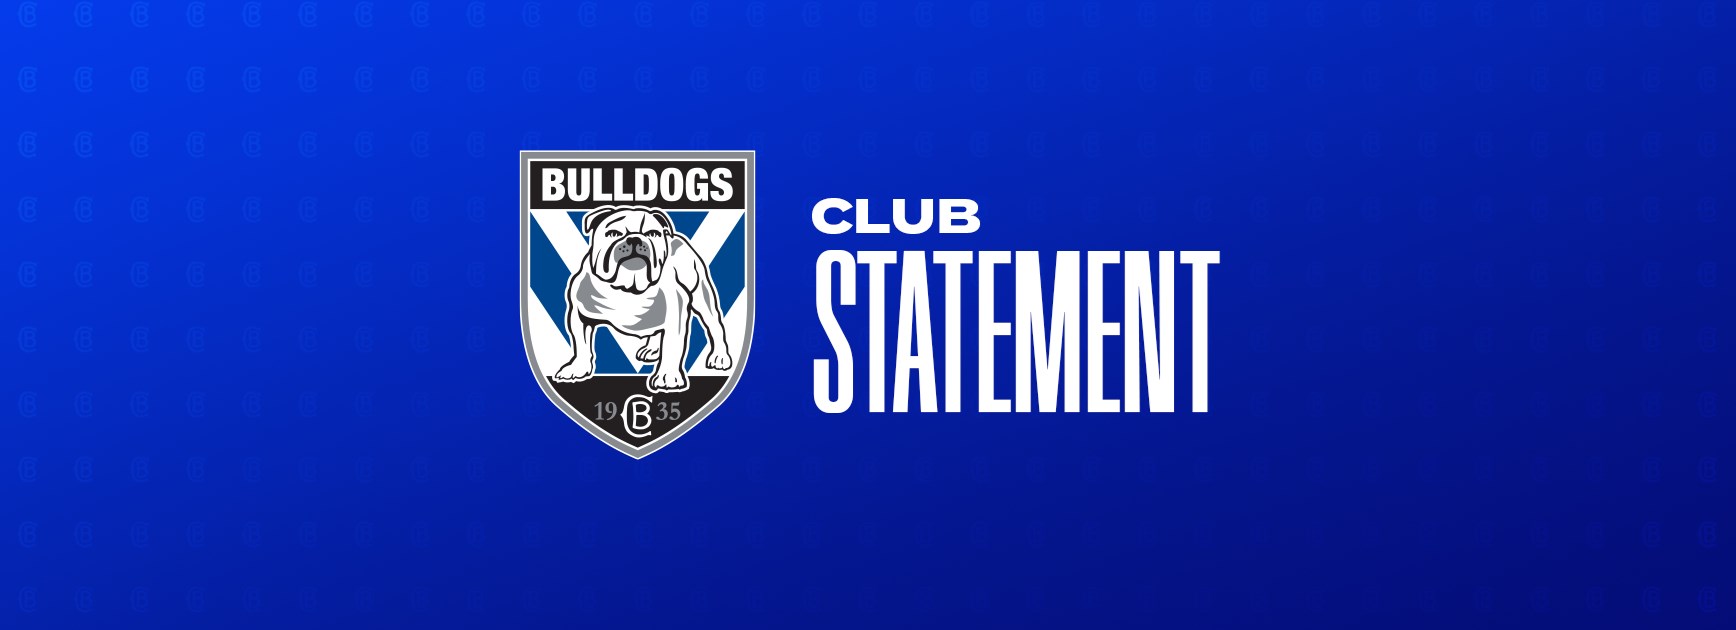 Club Statement: Bulldogs to defend claim lodged by former player